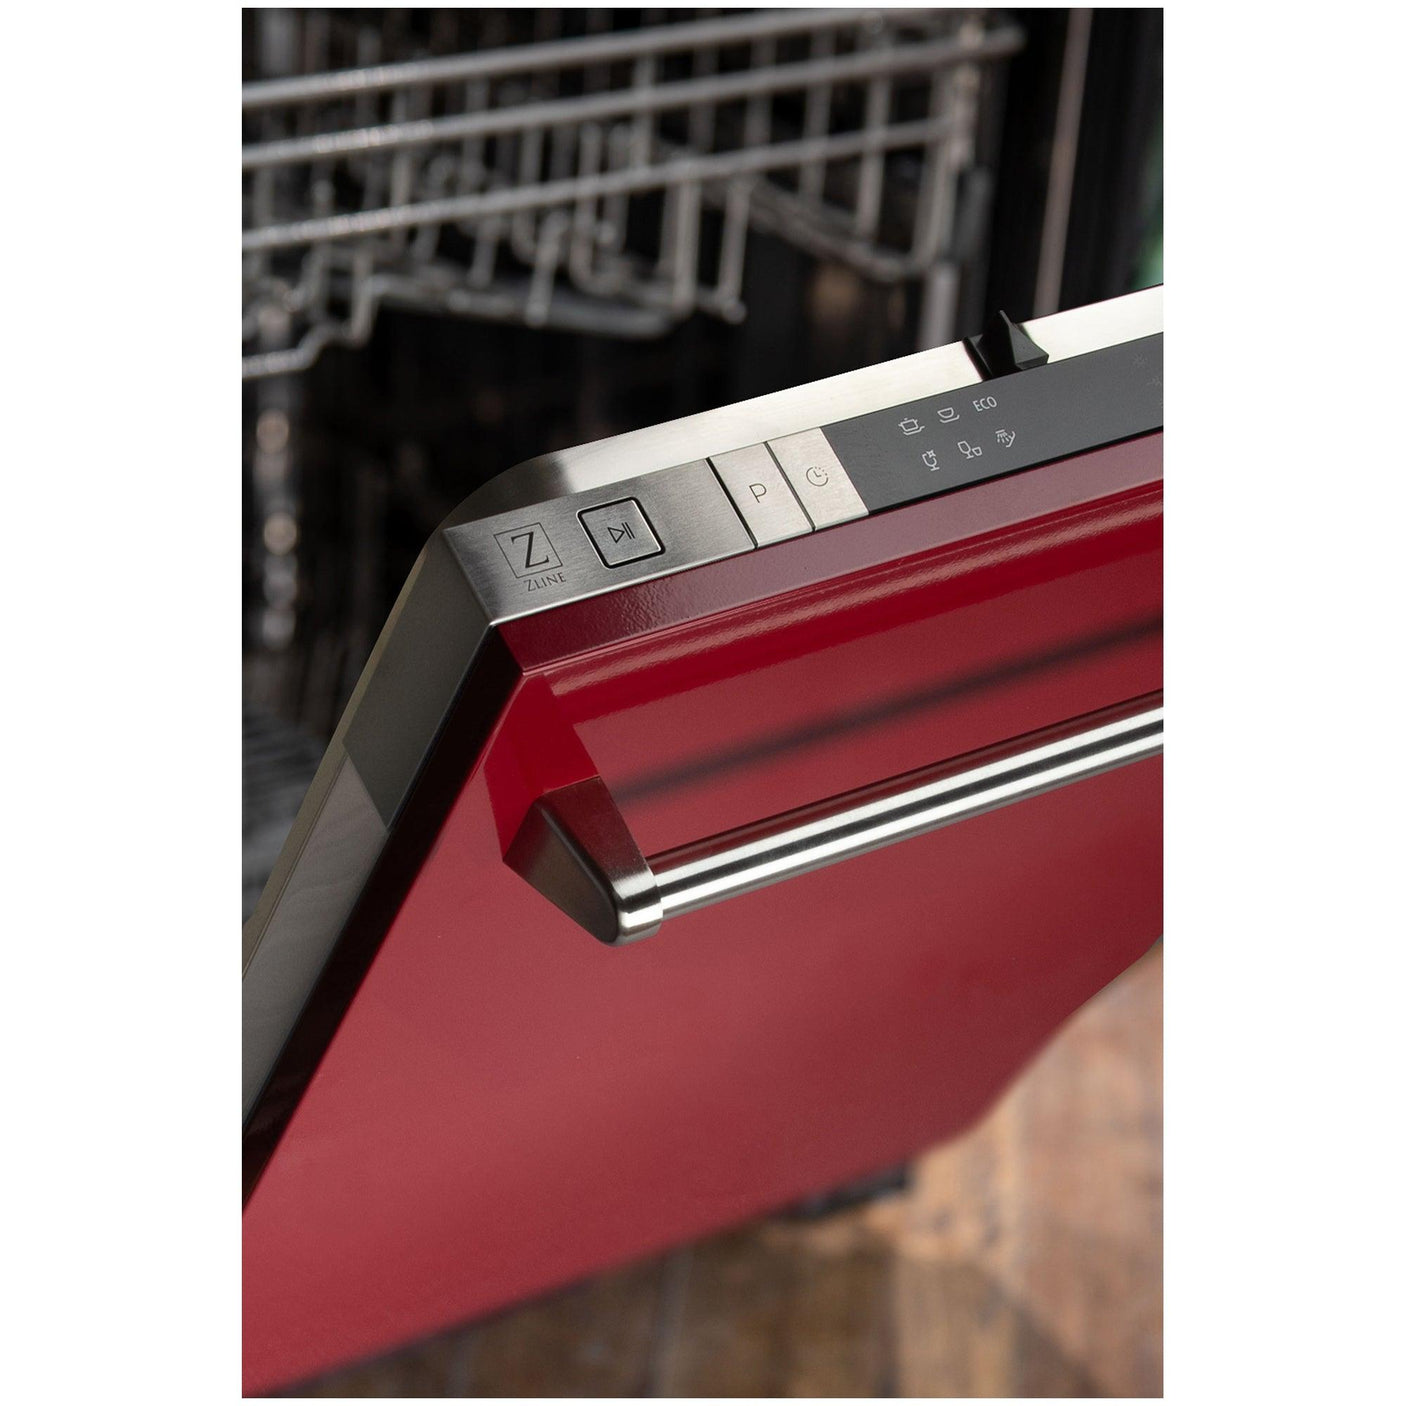 ZLINE 18 in. Compact Top Control Dishwasher with Stainless Steel Tub and Traditional Handle, 52dBa (DW-18) [Color: Red Gloss]